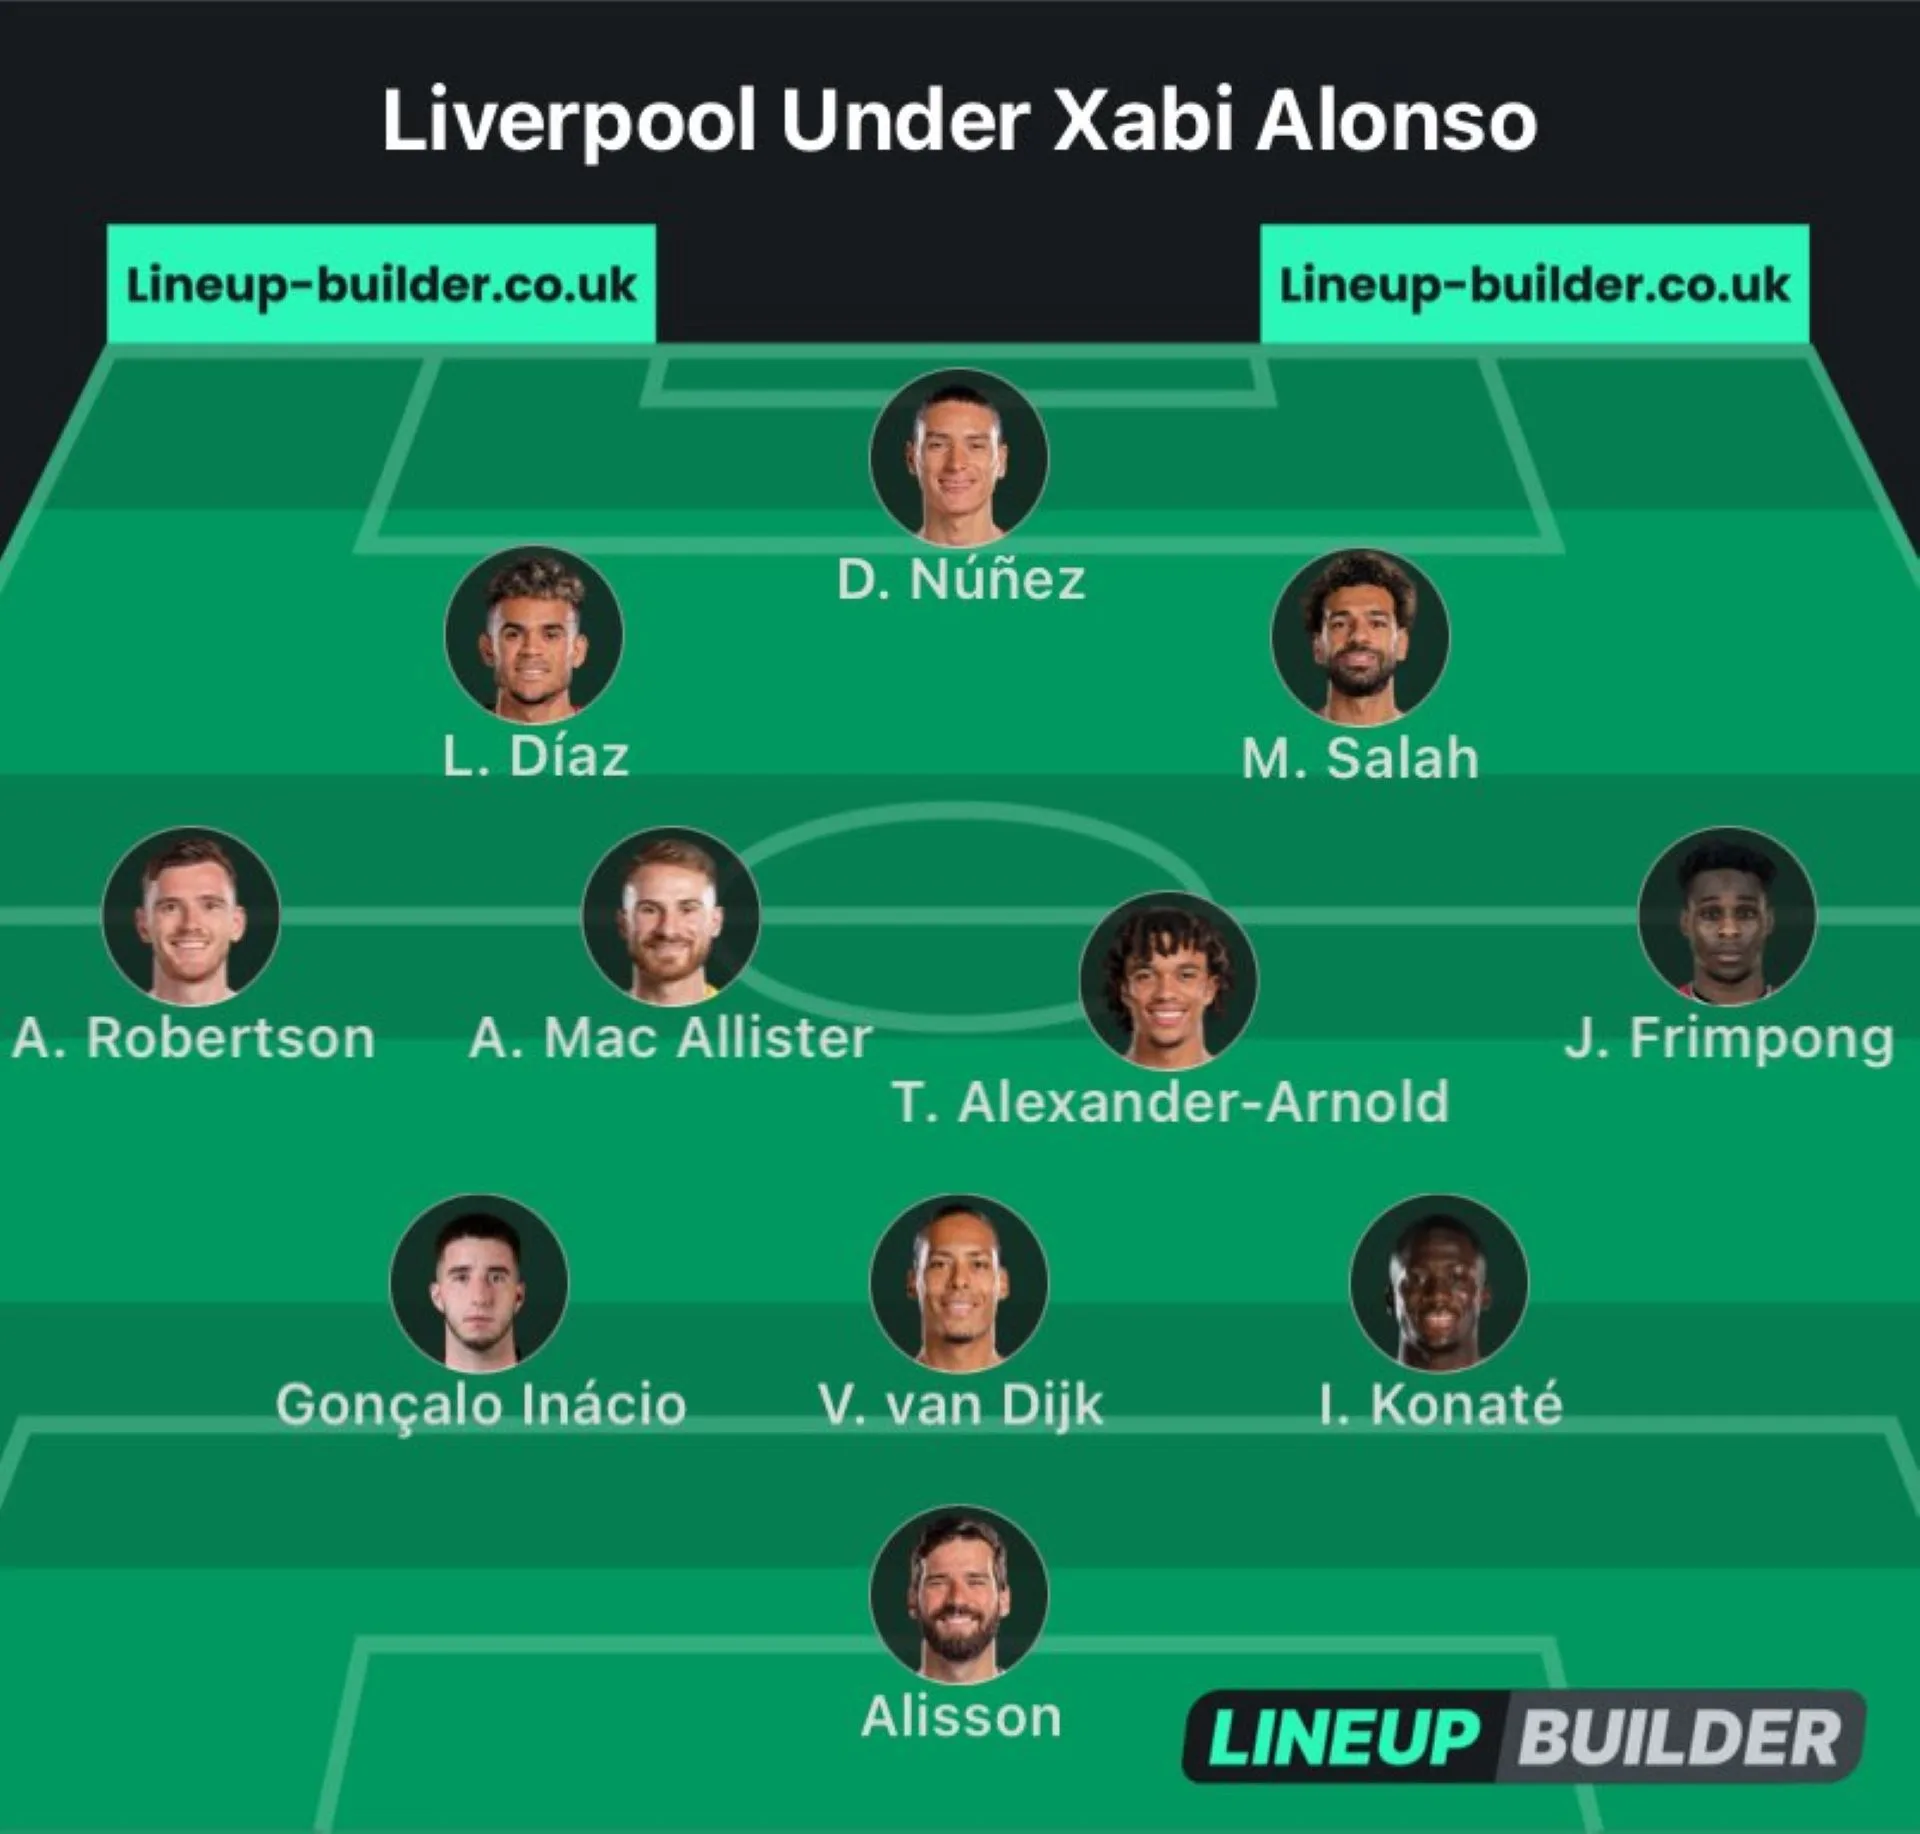 Potential liverpool team under Xabi Alonso